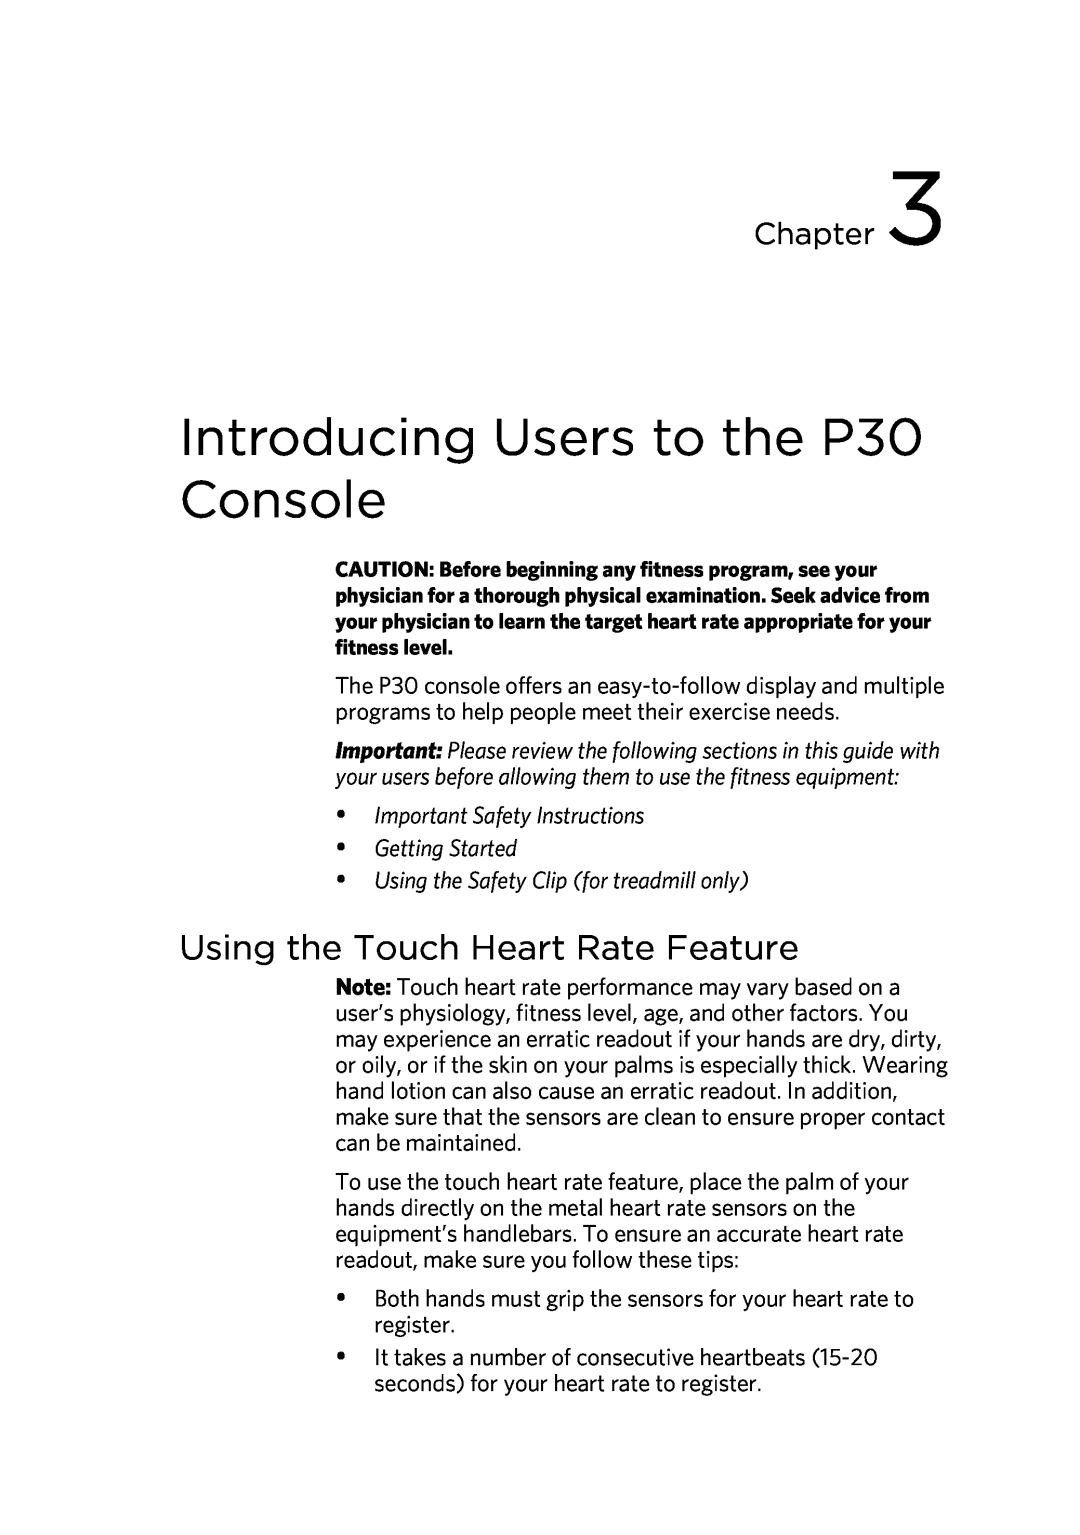 Precor manual Introducing Users to the P30 Console, Using the Touch Heart Rate Feature, Chapter 